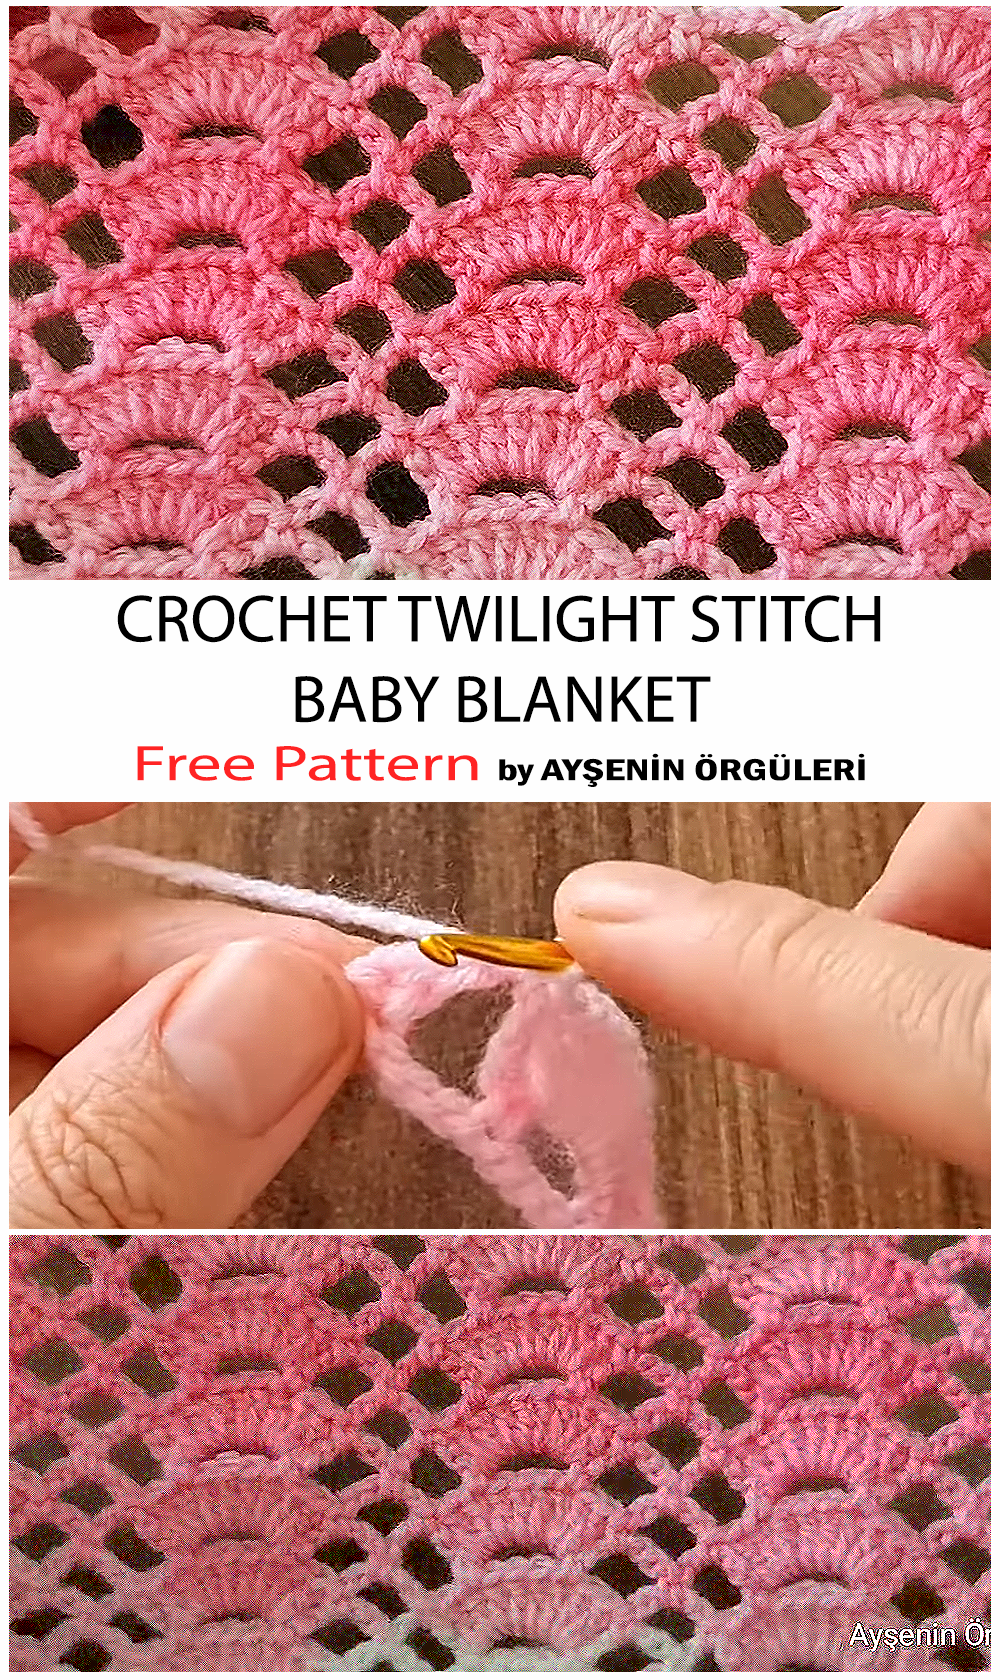 How To Crochet Twilight Stitch Baby Blanket - Free Pattern For Beginners